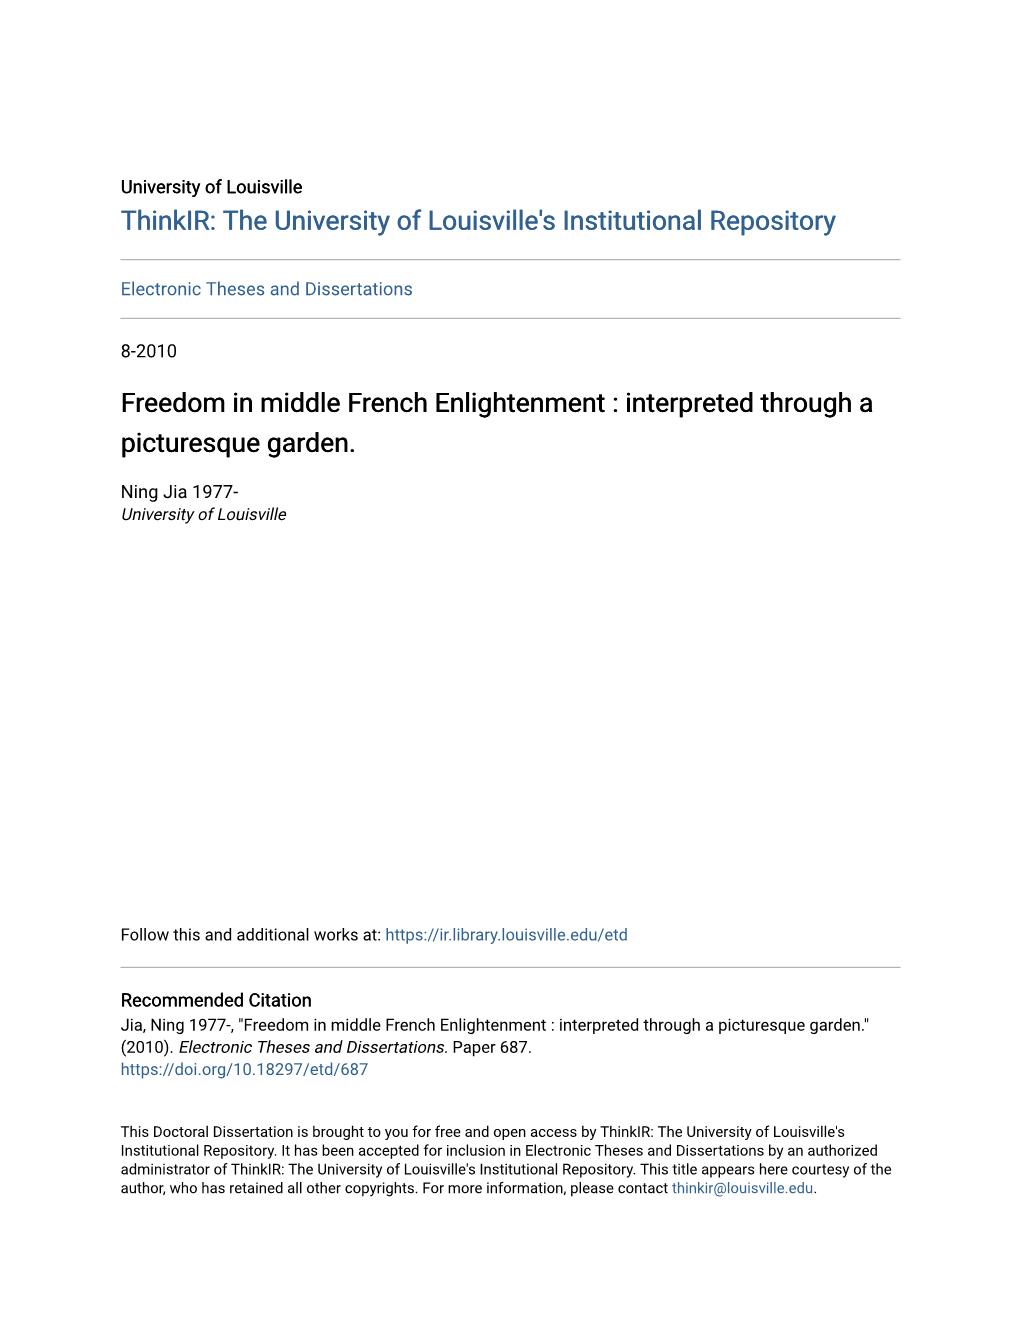 Freedom in Middle French Enlightenment : Interpreted Through a Picturesque Garden